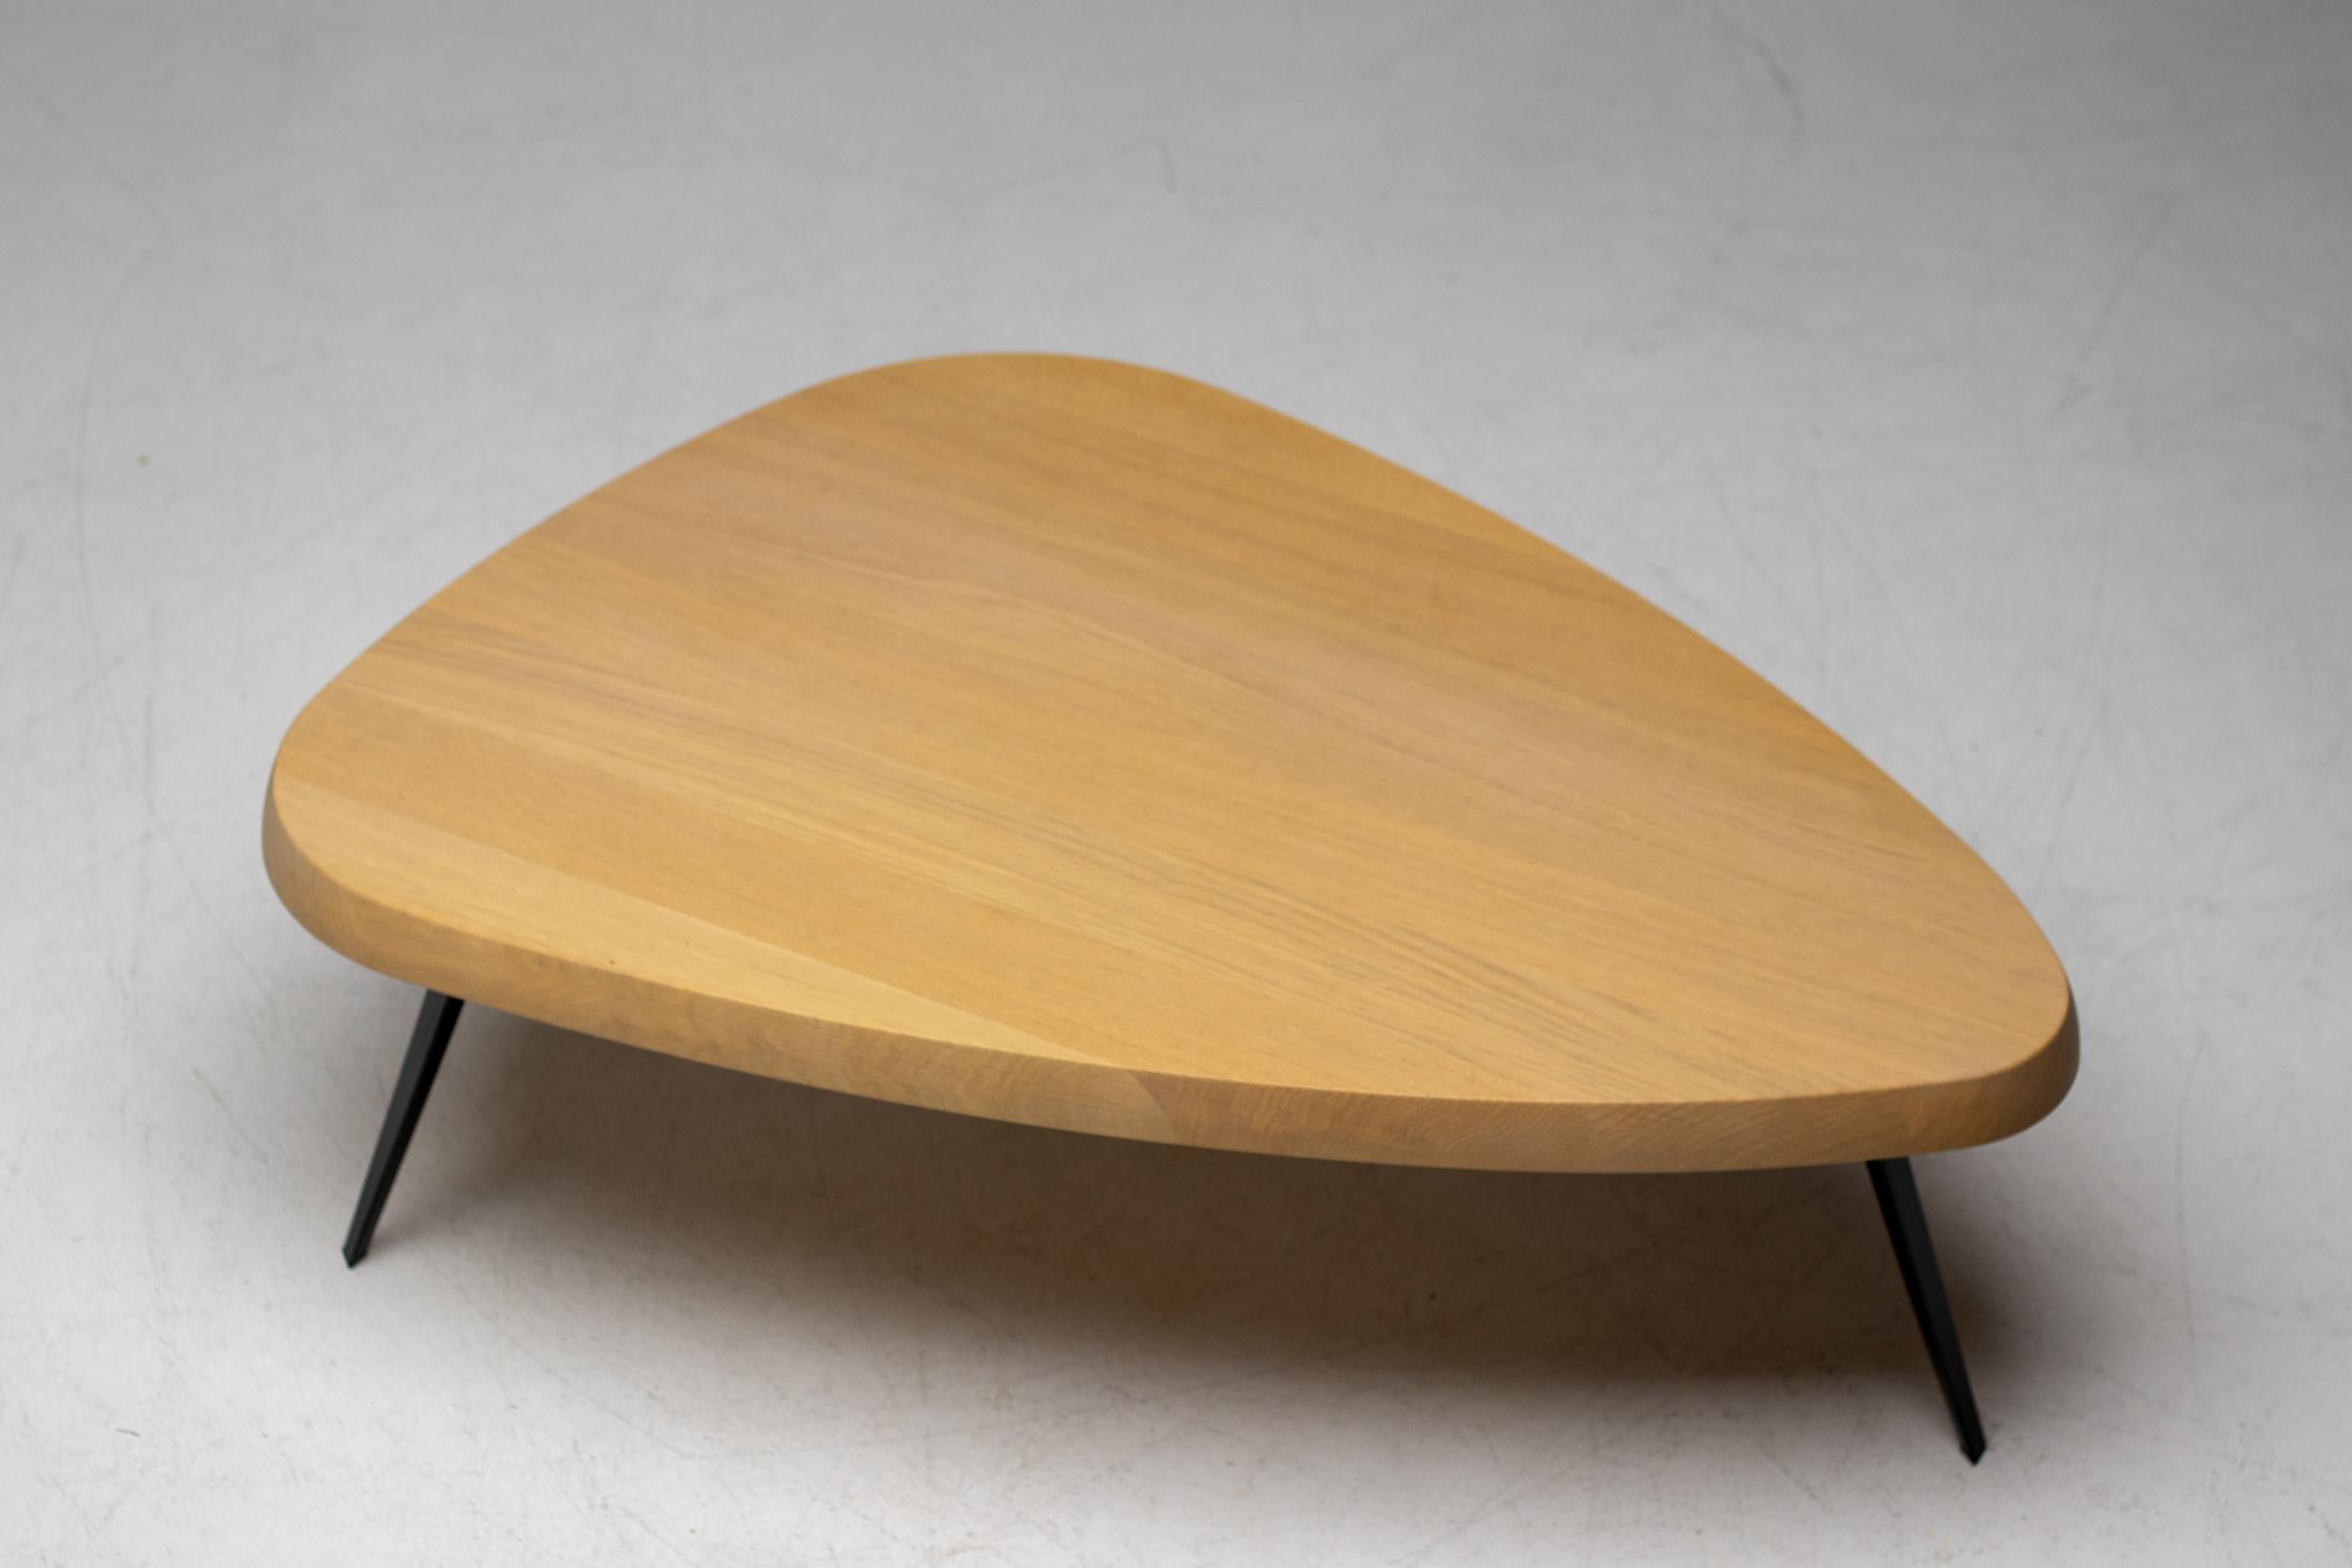 Table designed by Charlotte Perriand circa 1952. Manufactured in 2014 by Cassina, Italy. 
Lovingly cared for by a collector of Jean Prouvé, Le Corbusier and Charlotte Perriand furniture.
Marked and numbered with branded mark. 

Included as one